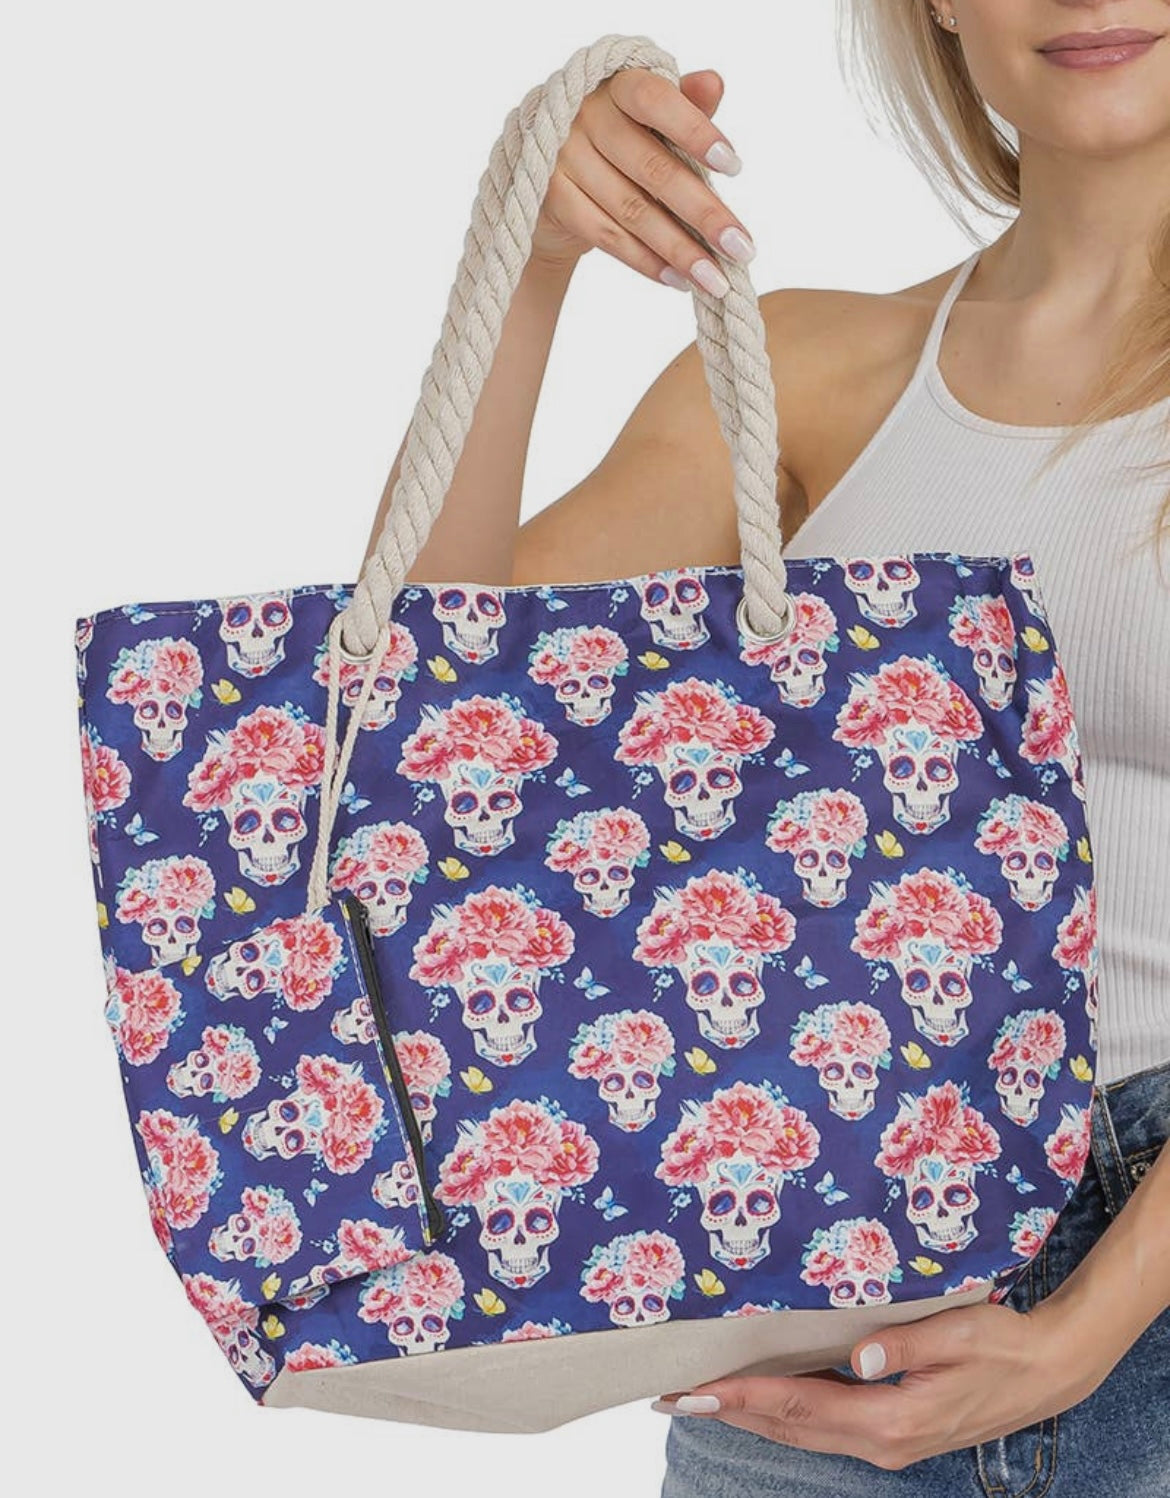 Sugar Skull Floral Tote Bag With Mini Pouch Inside